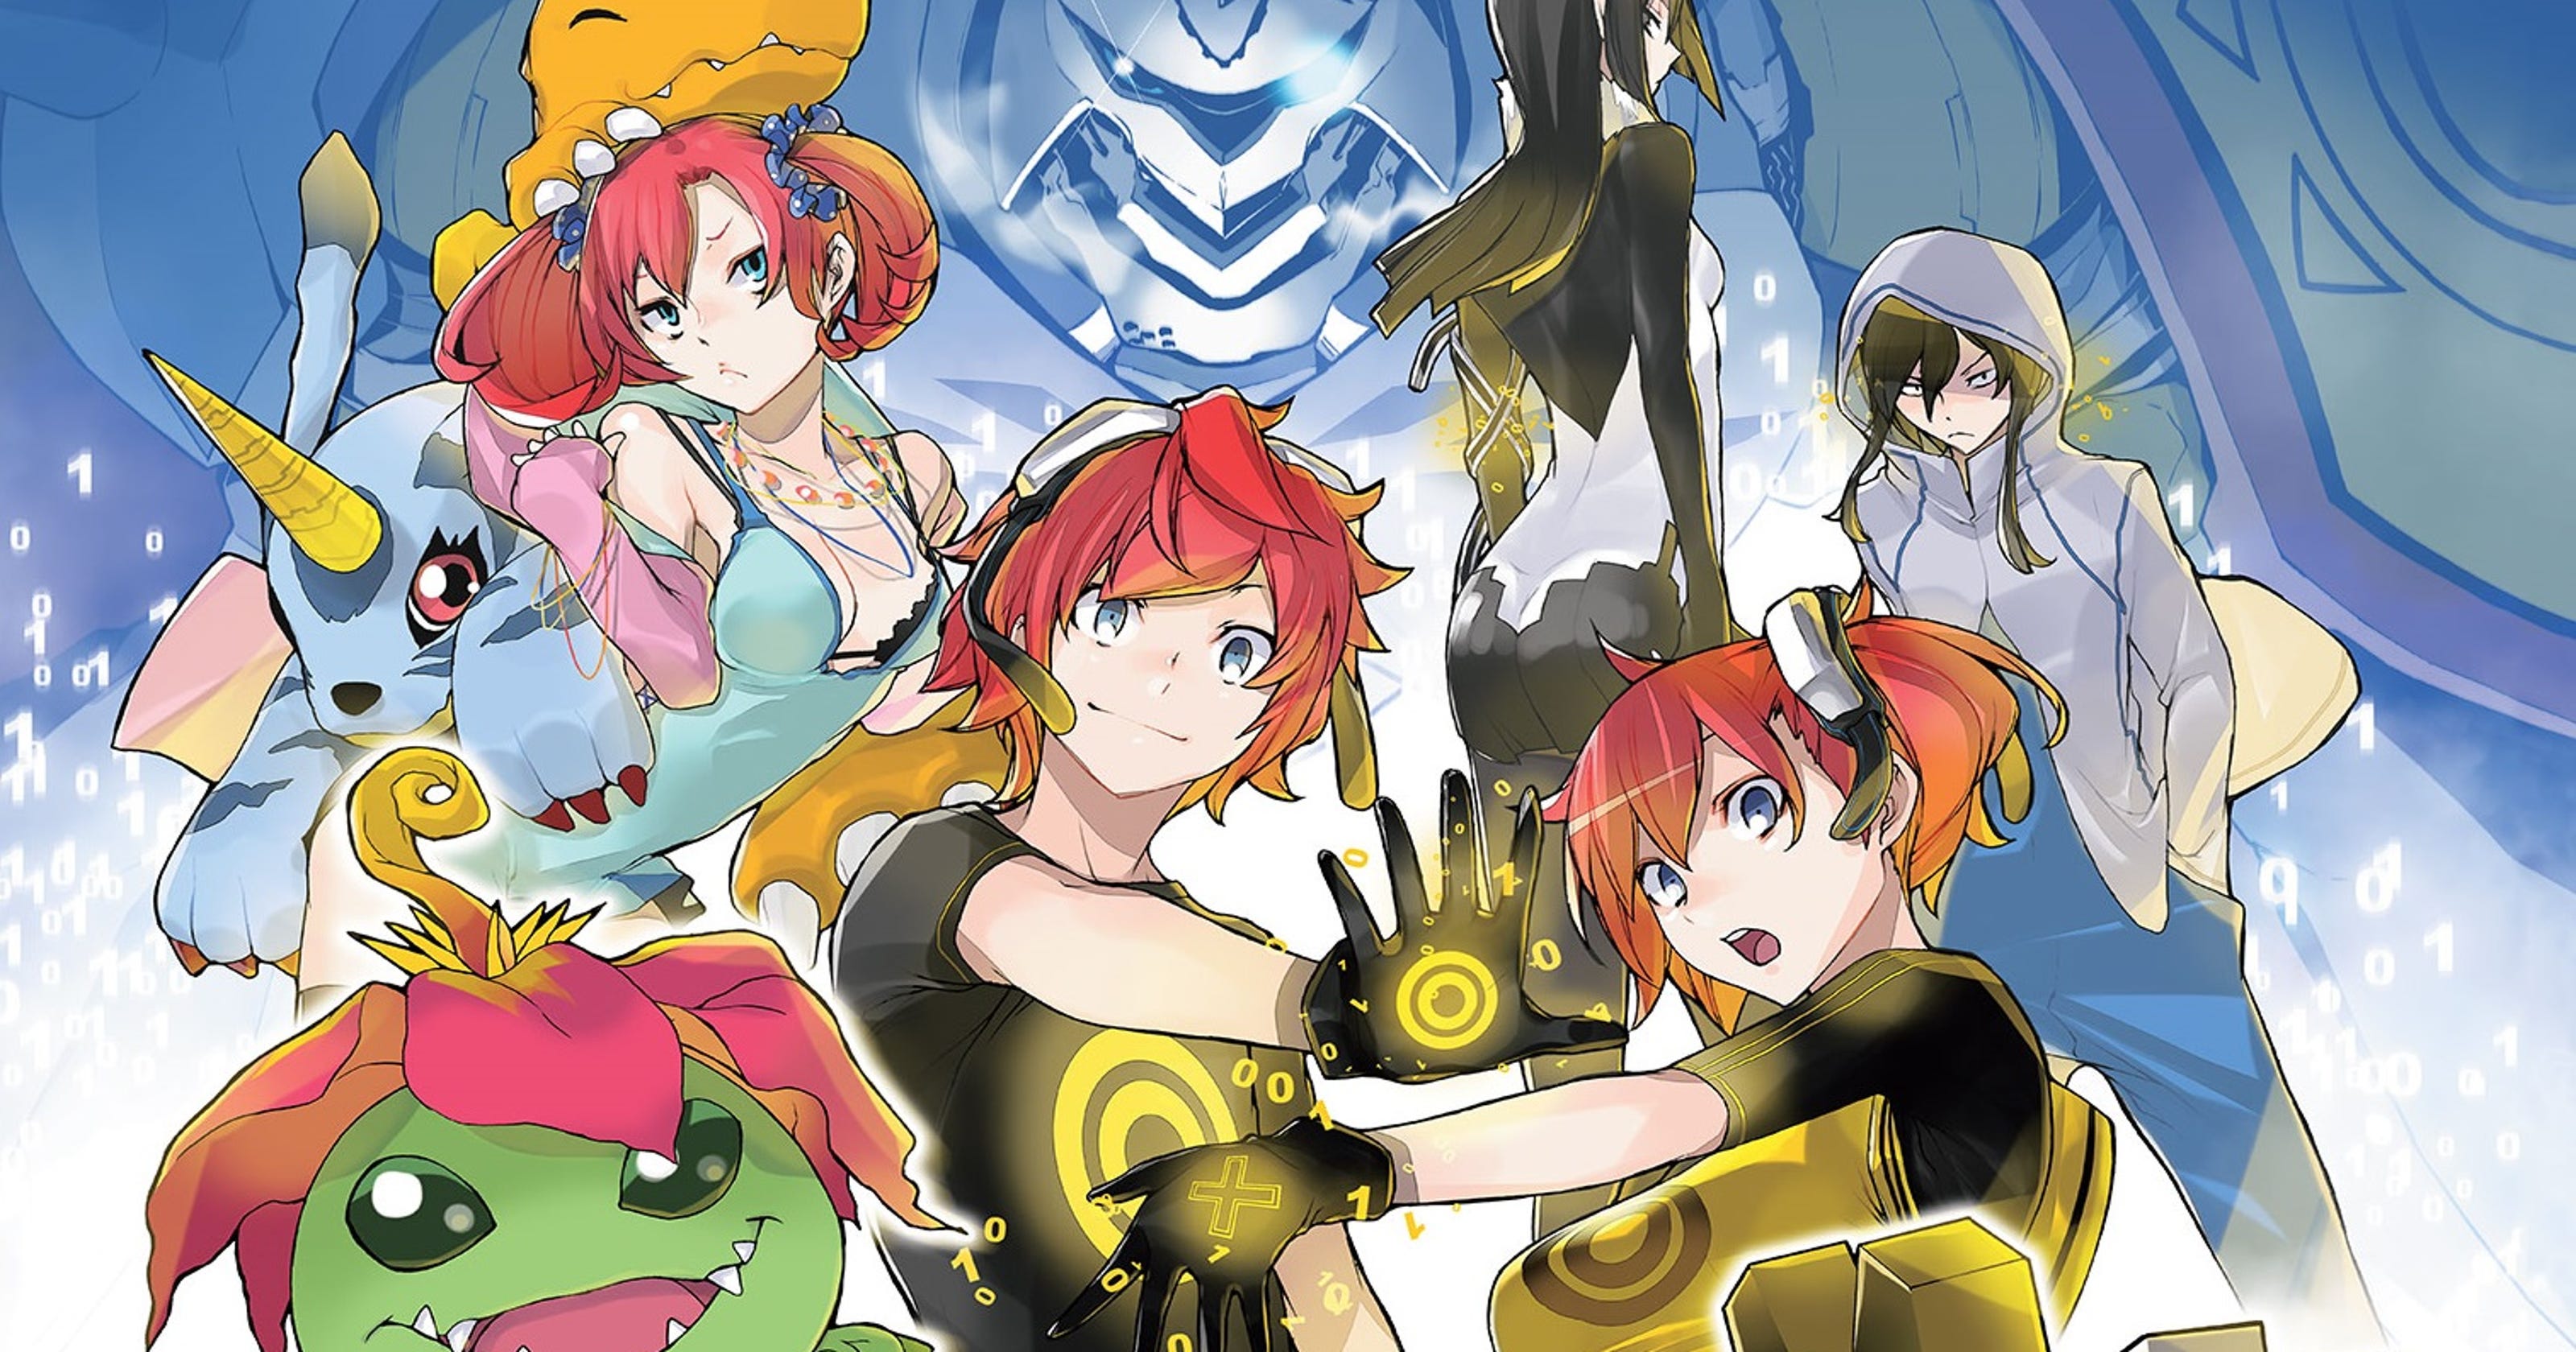 Digimon Story Cyber Sleuth Chapter 15 Guide